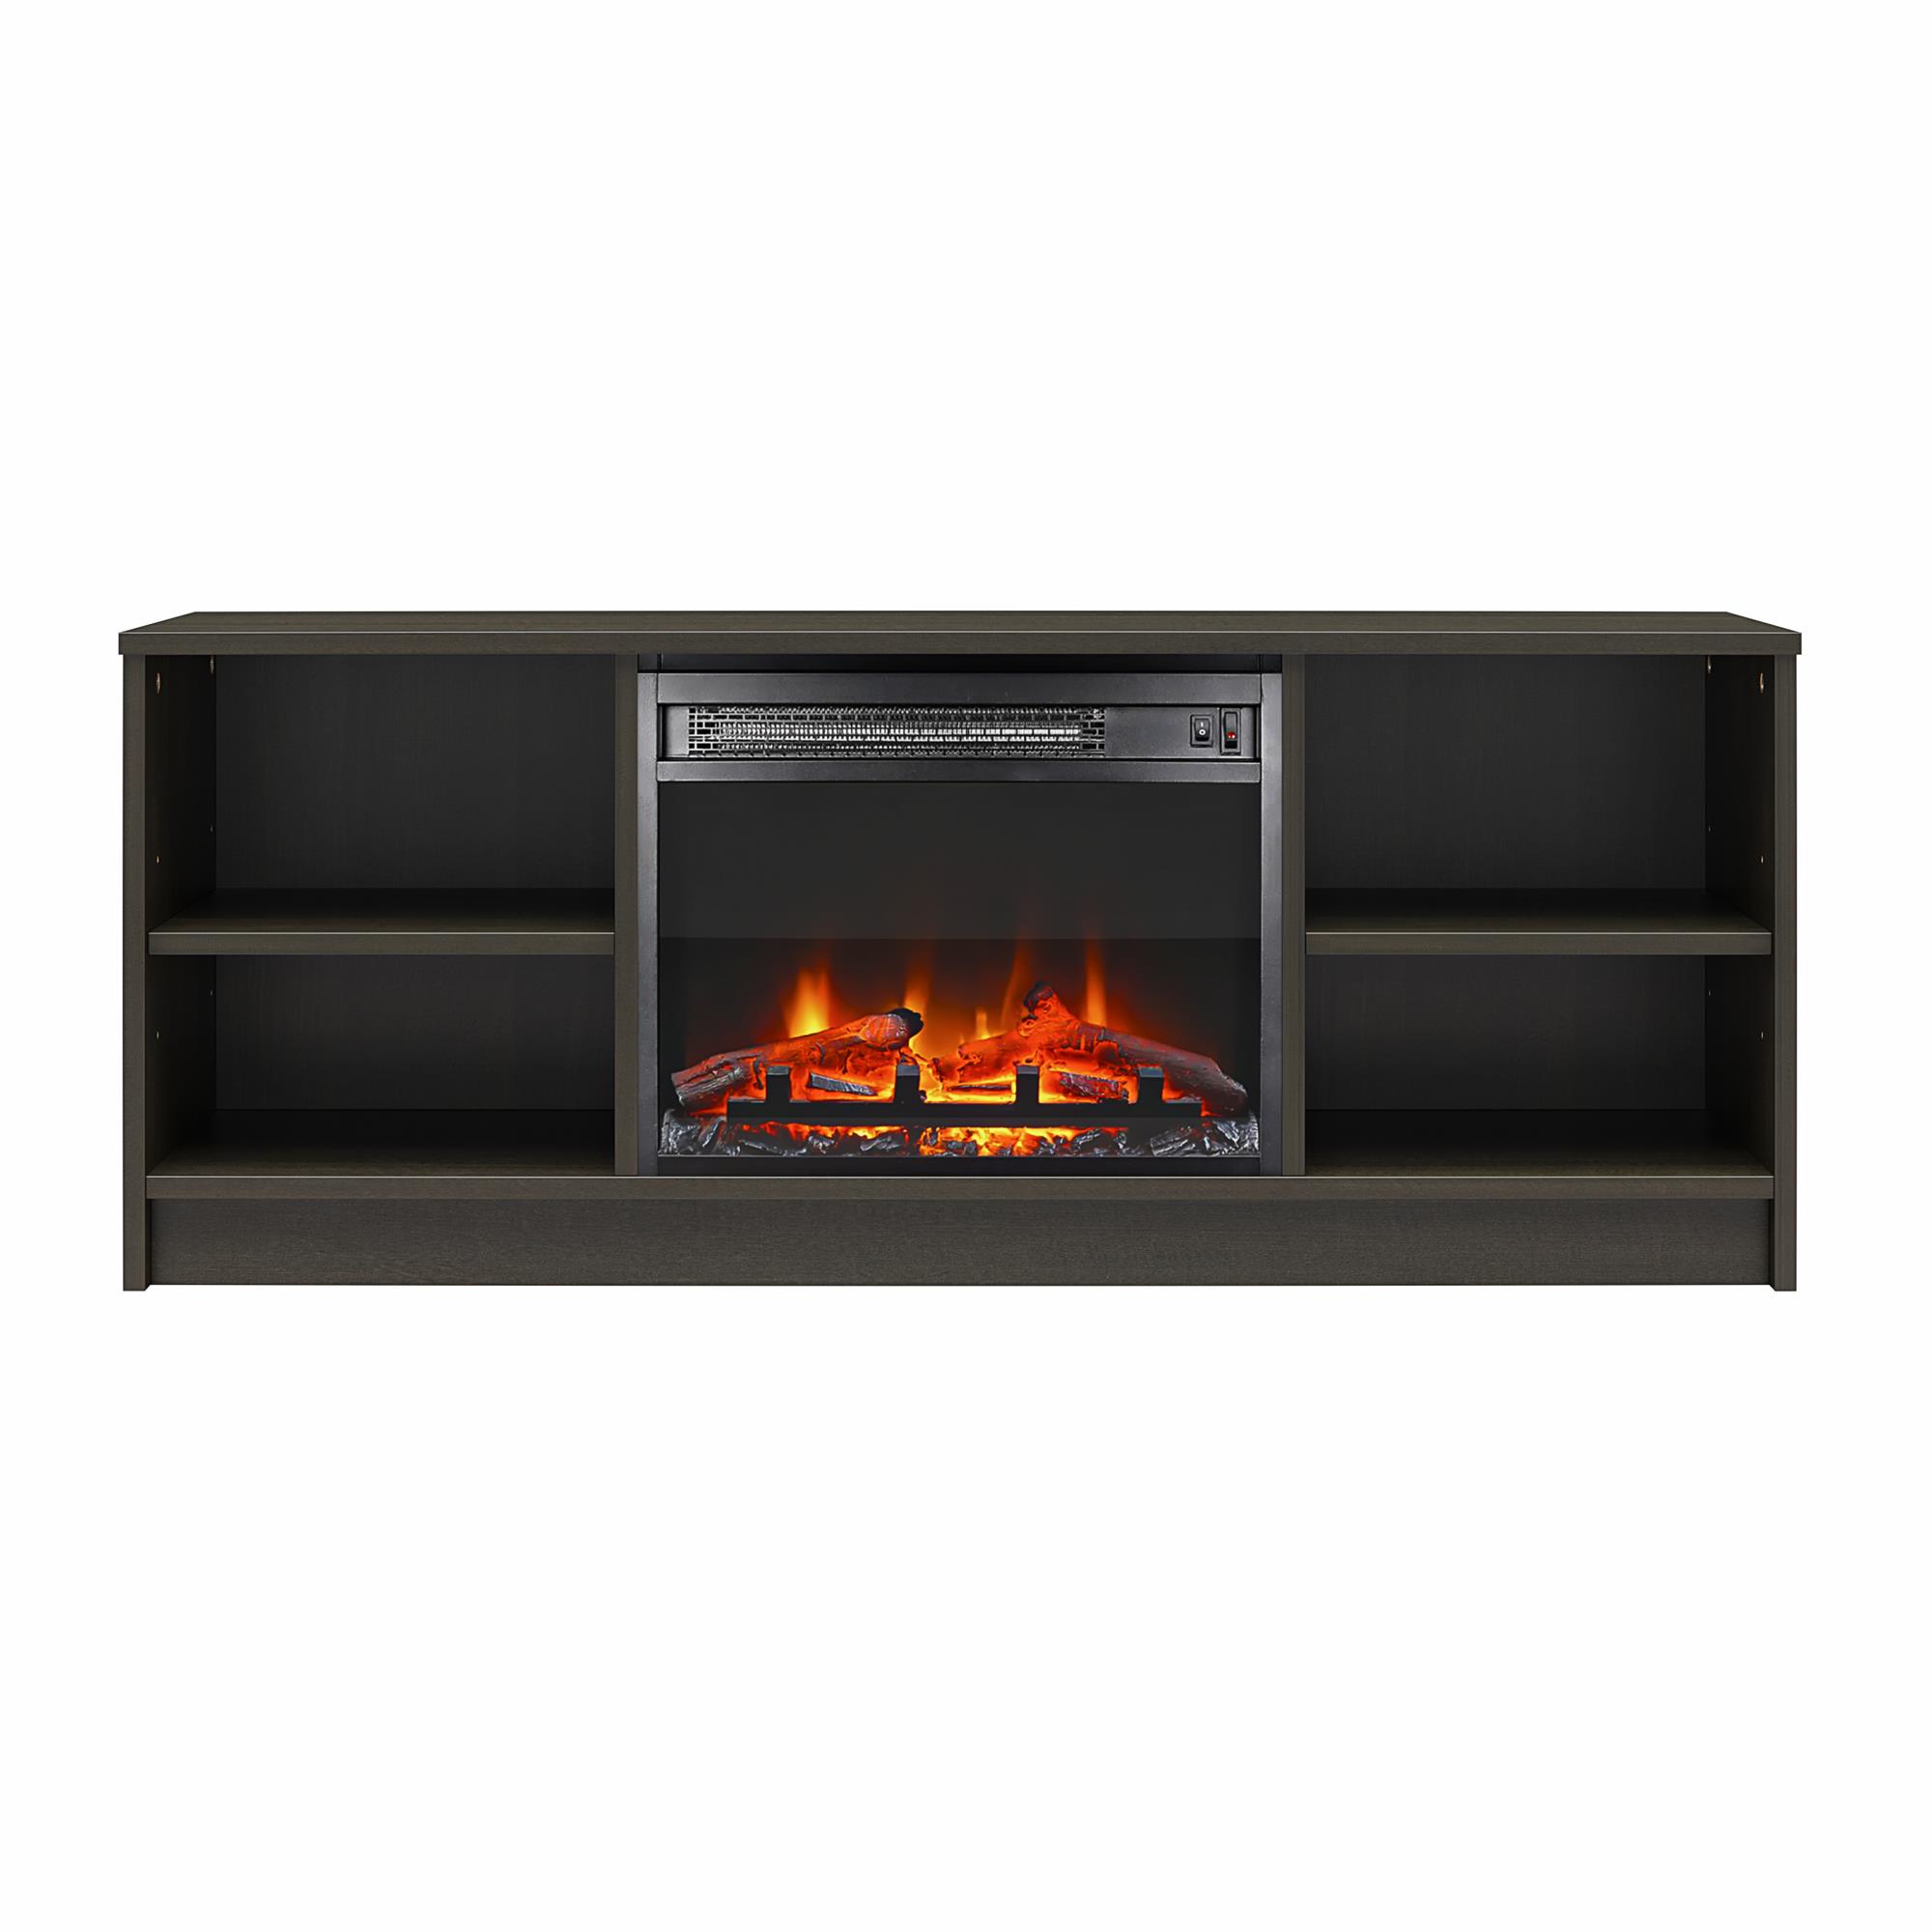 Mainstays Fireplace TV Stand, for TVs up to 55", Espresso - image 4 of 12